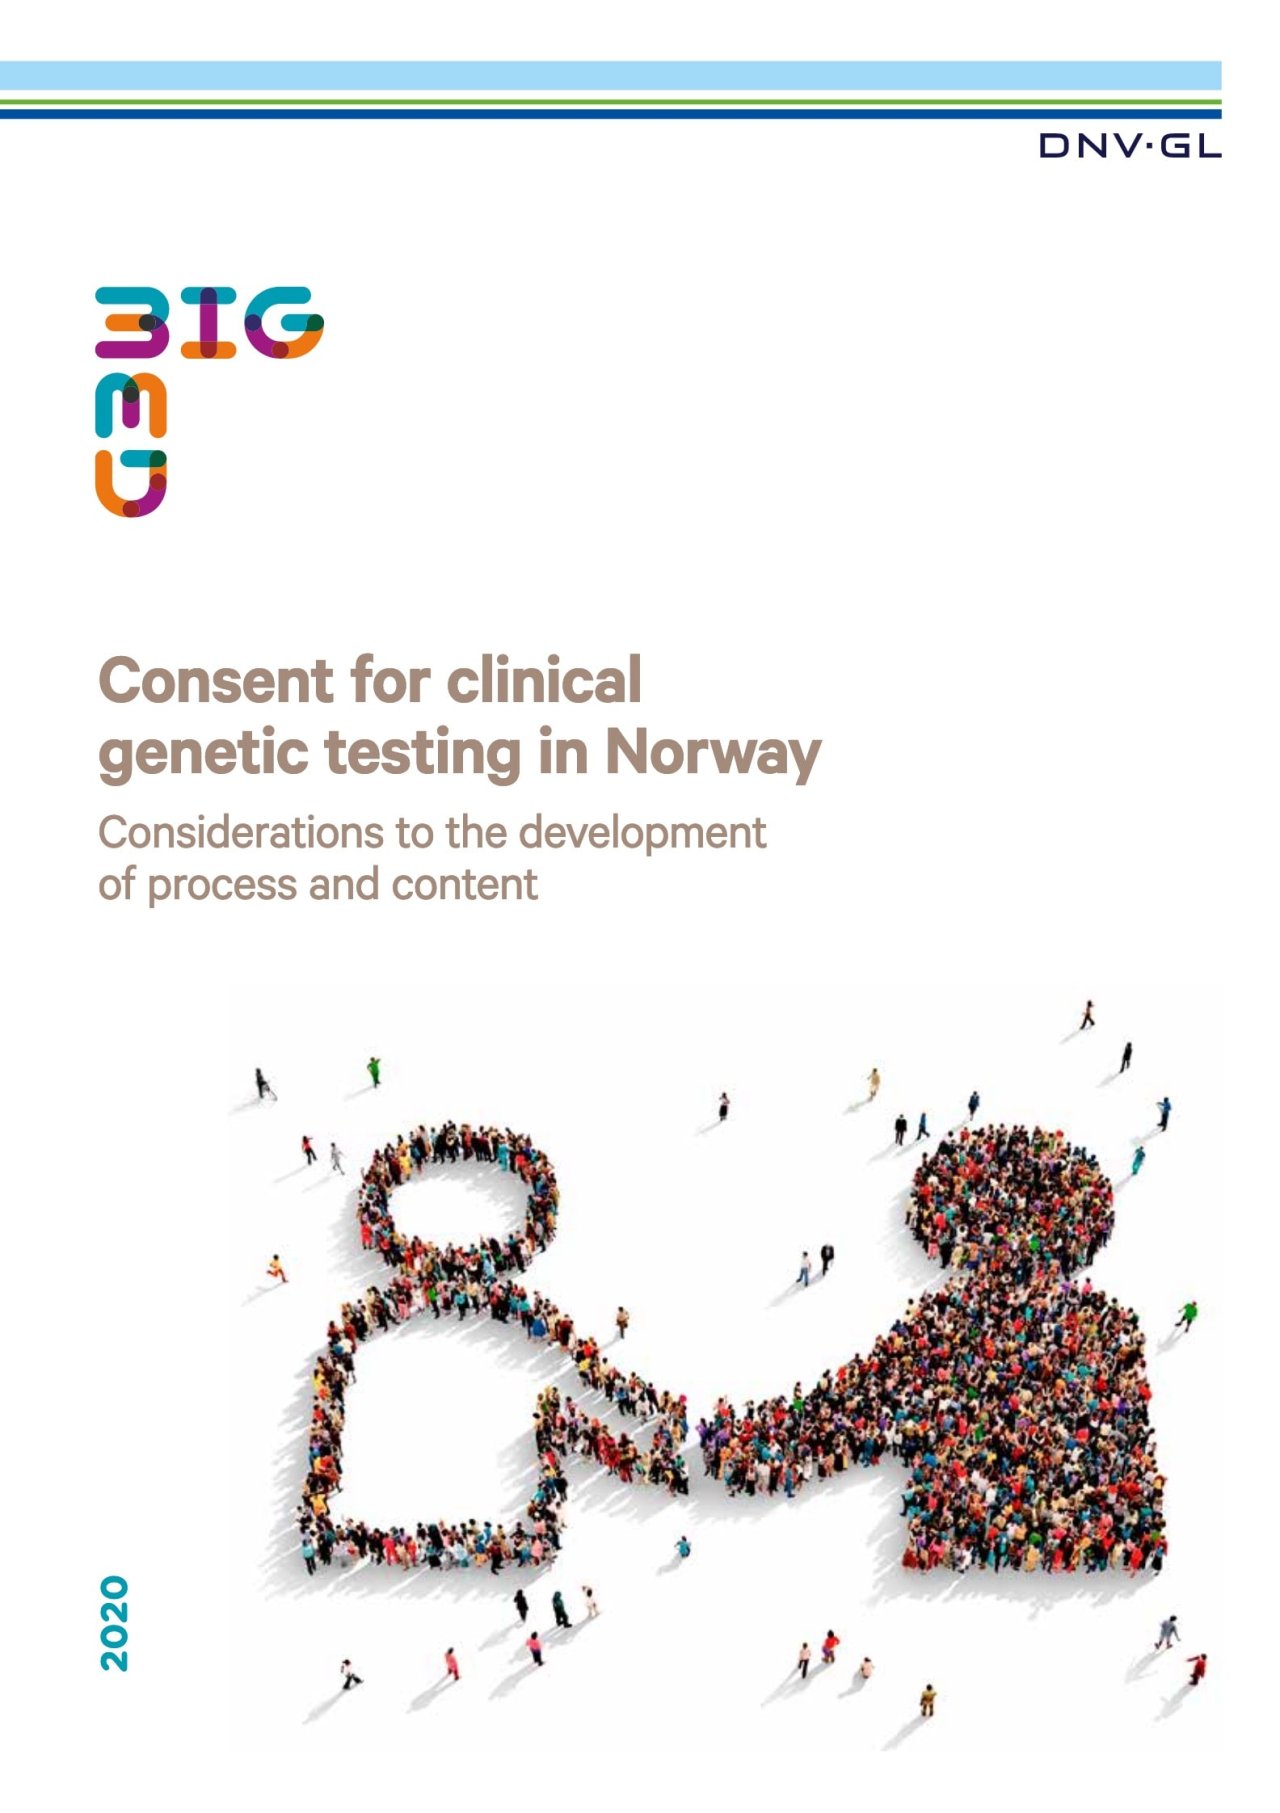 Ceonsent for clinical genetic testing in Norway.